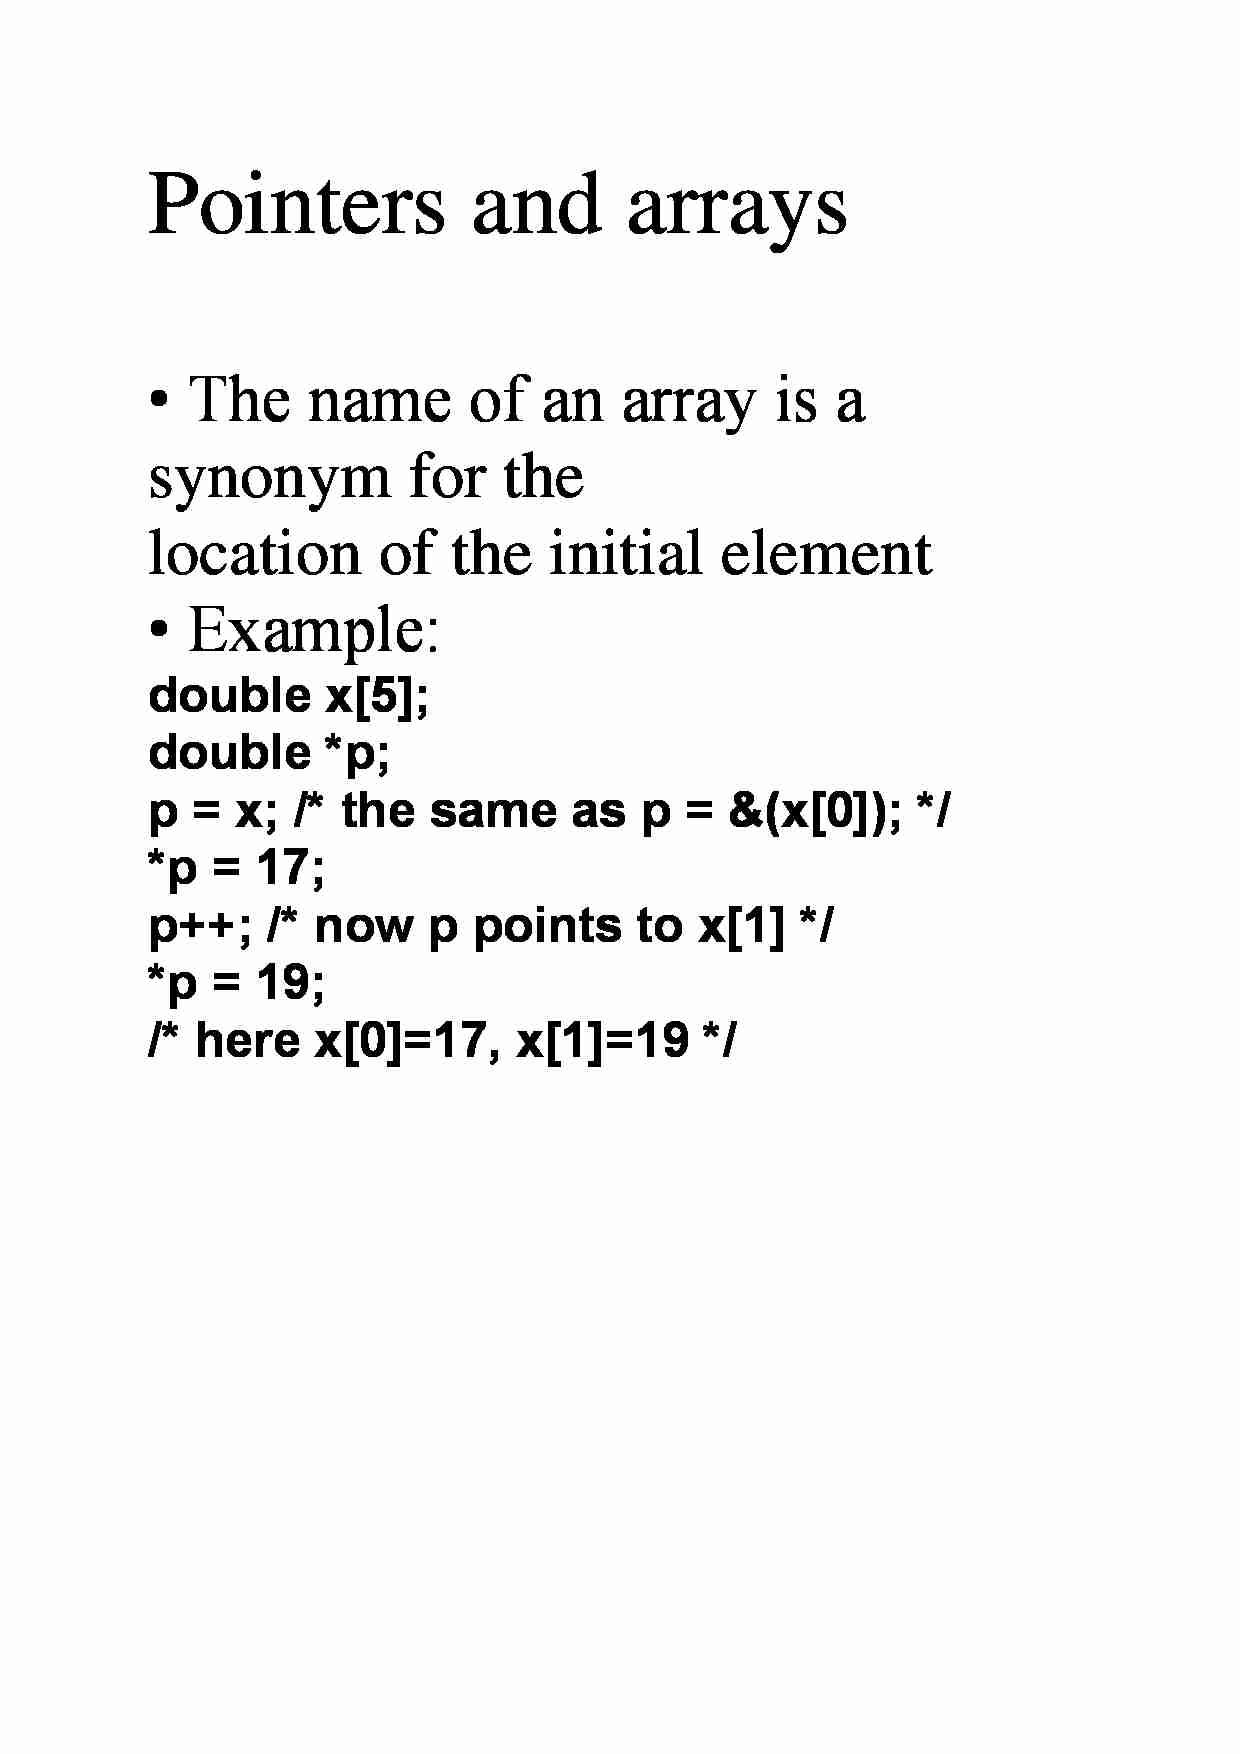 Pointers and arrays - strona 1